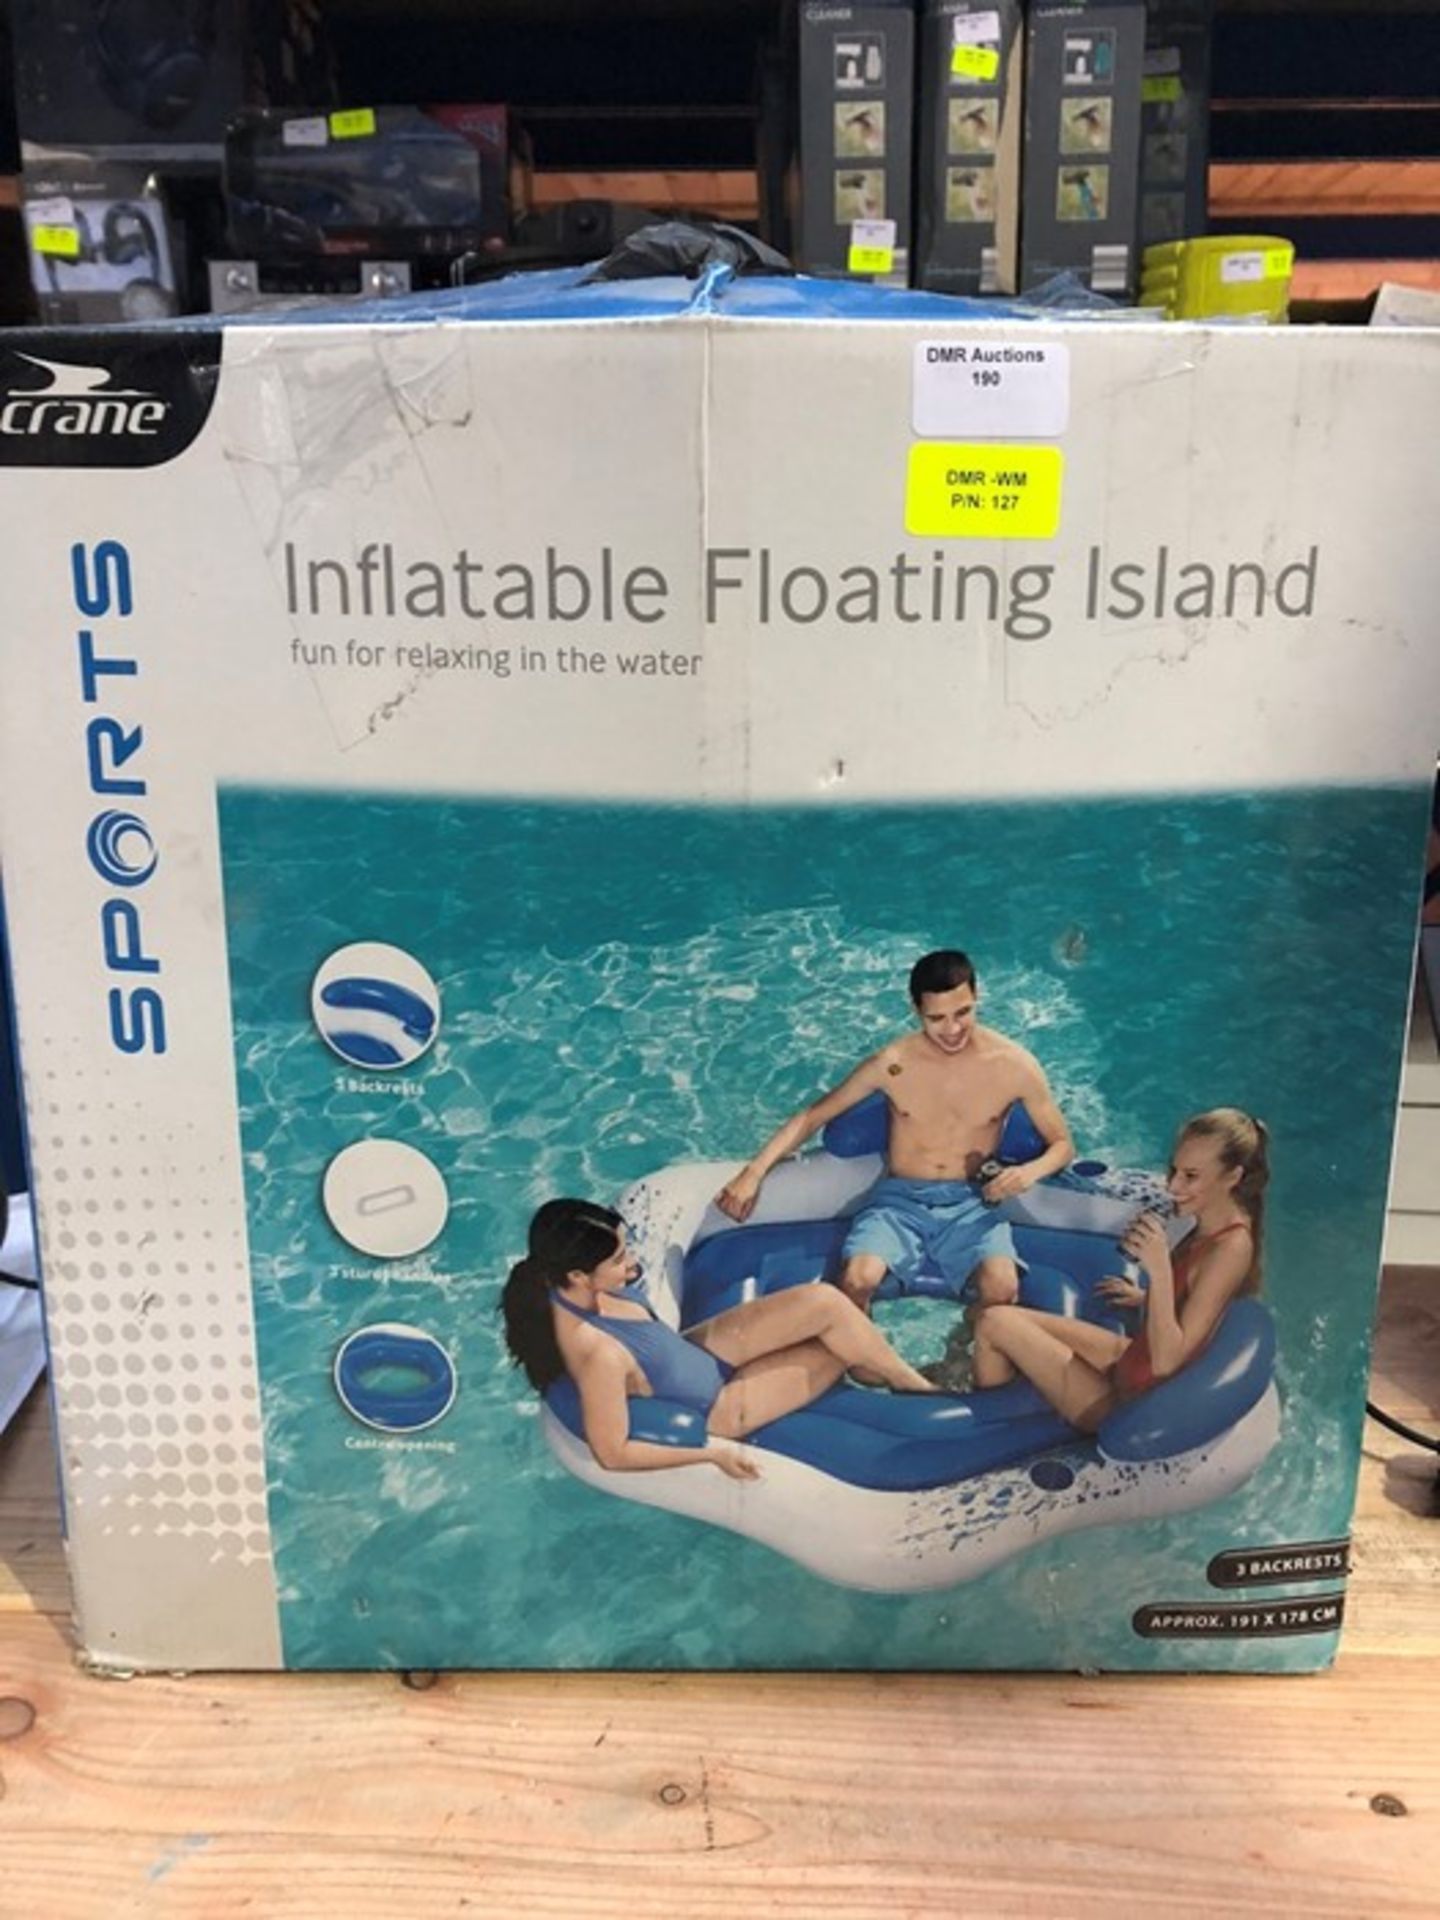 1 BOXED CRANE INFLATABLE FLOATING ISLAND / RRP £12.99 (PUBLIC VIEWING AVAILABLE)